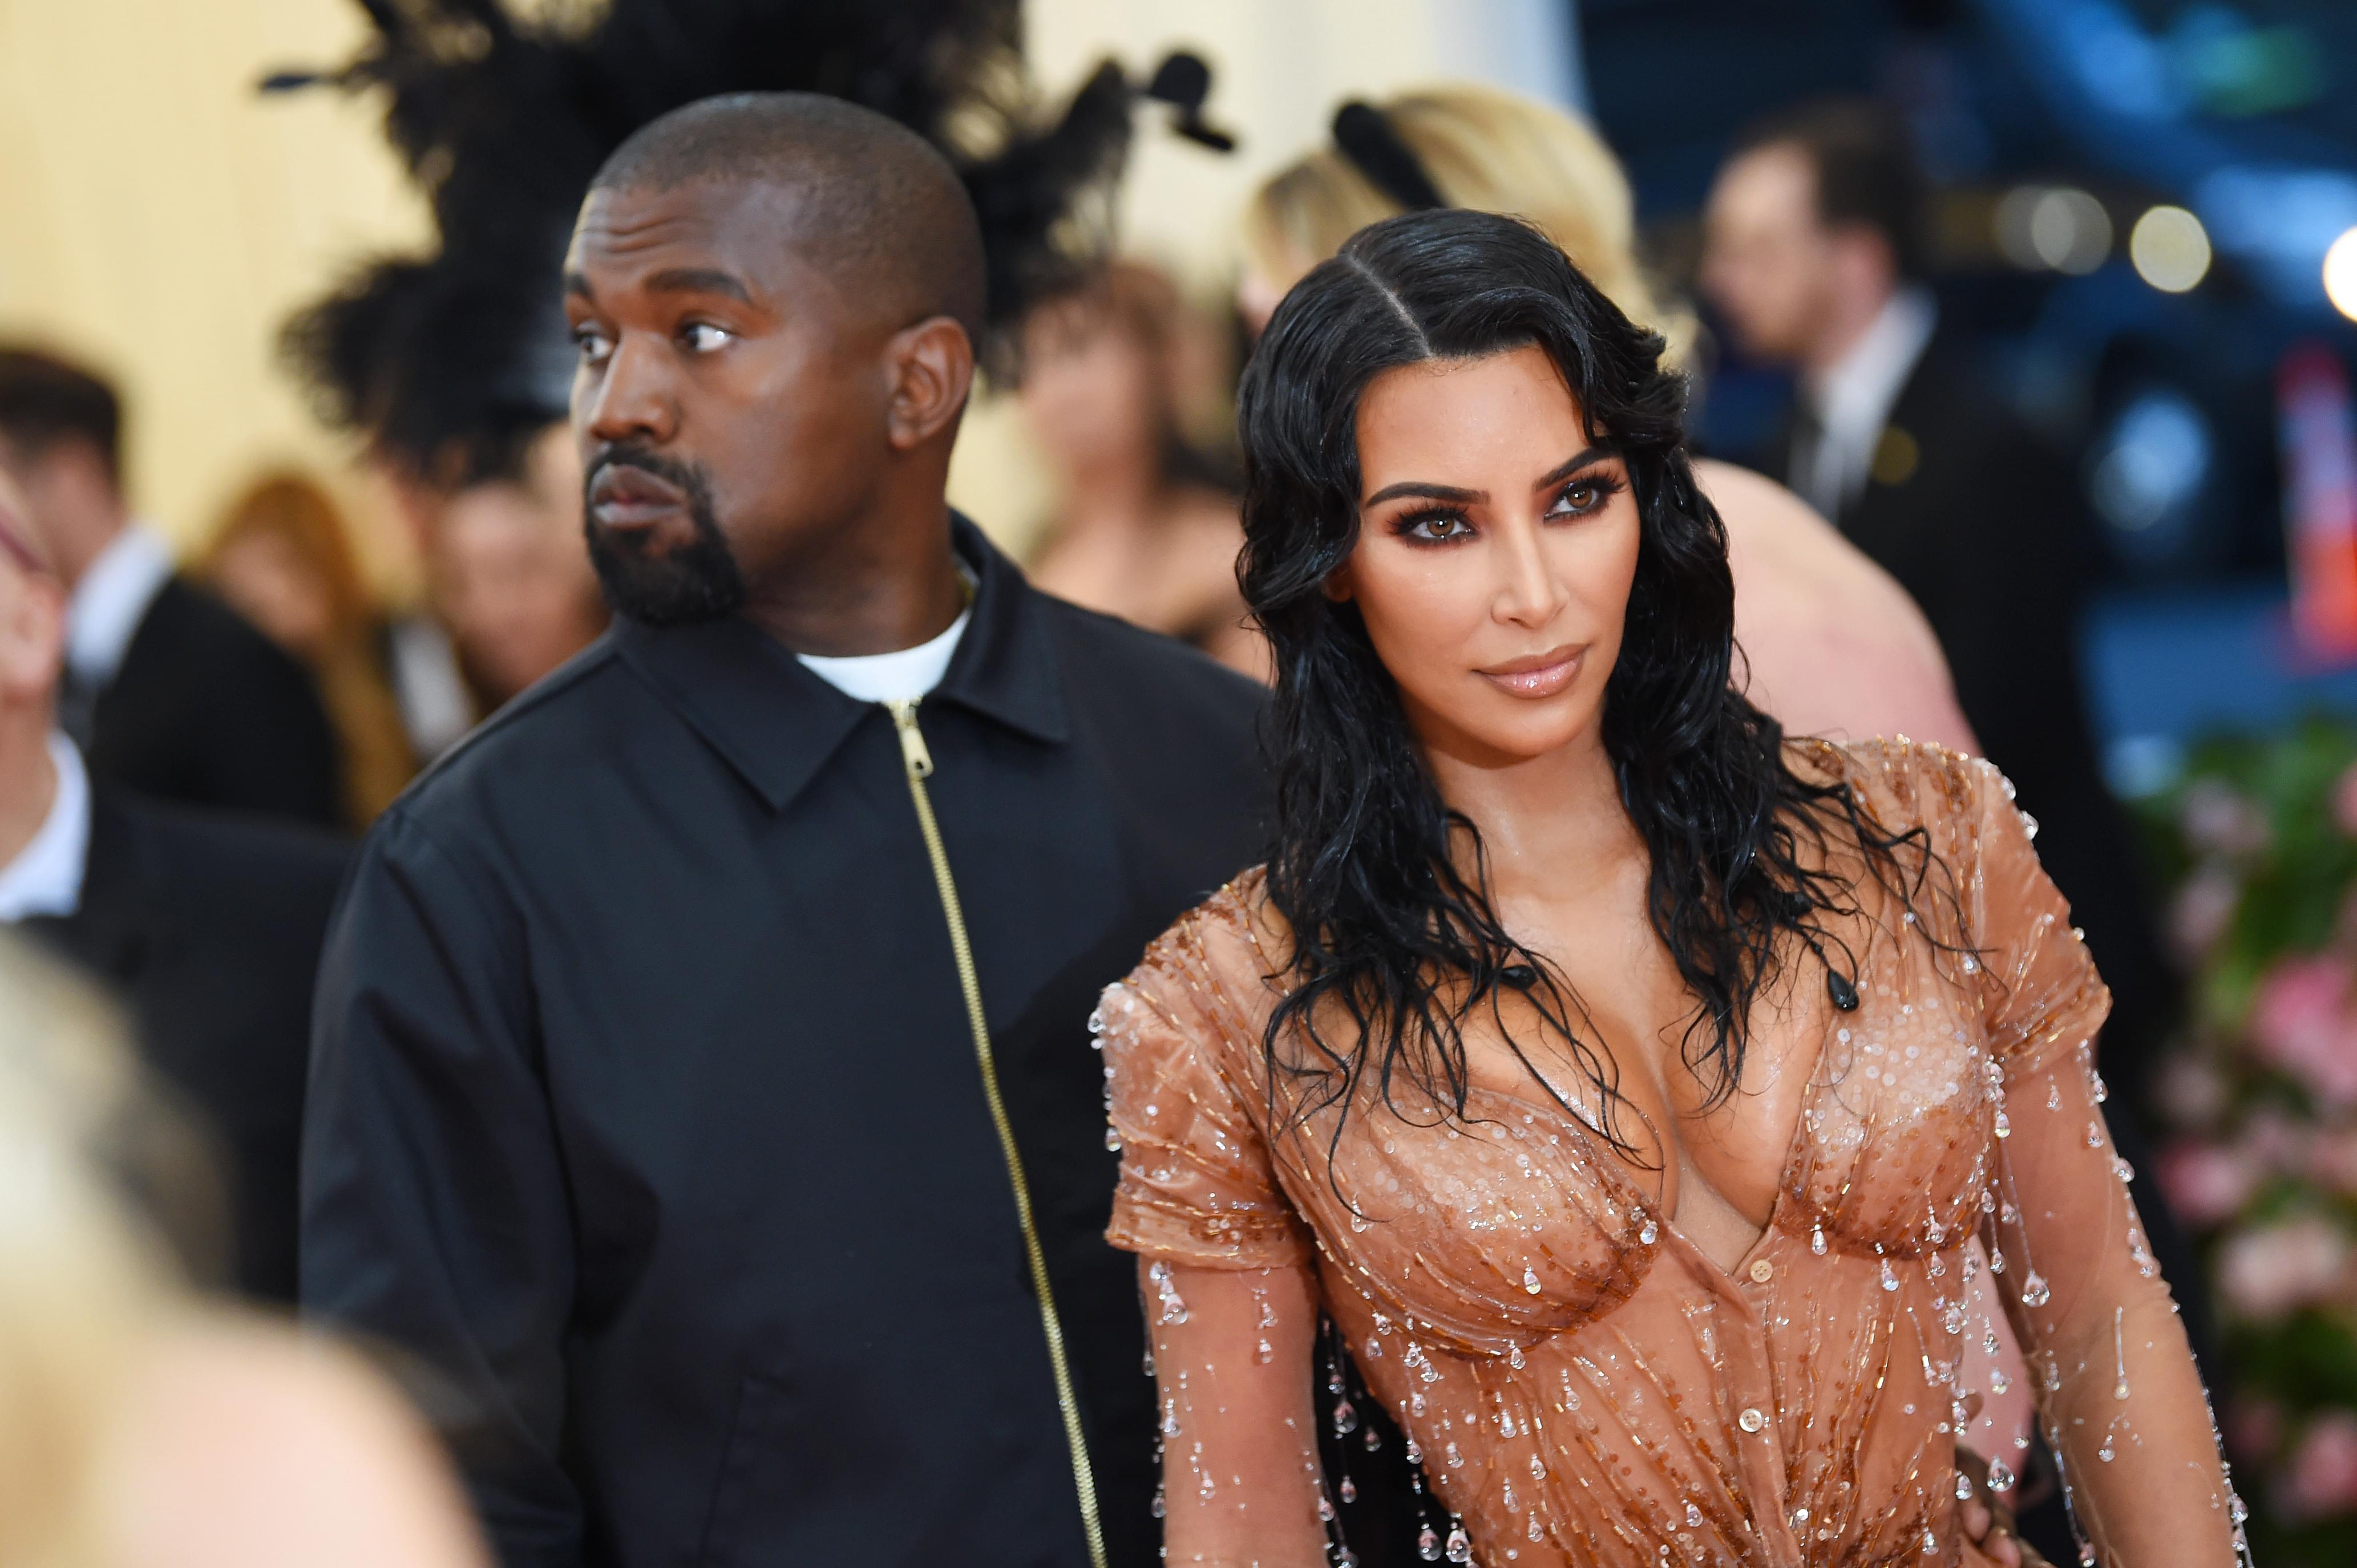 Kim Kardashian Reportedly “Very Hurt” & “Hysterically Crying” During Kanye West Wyoming Reunion